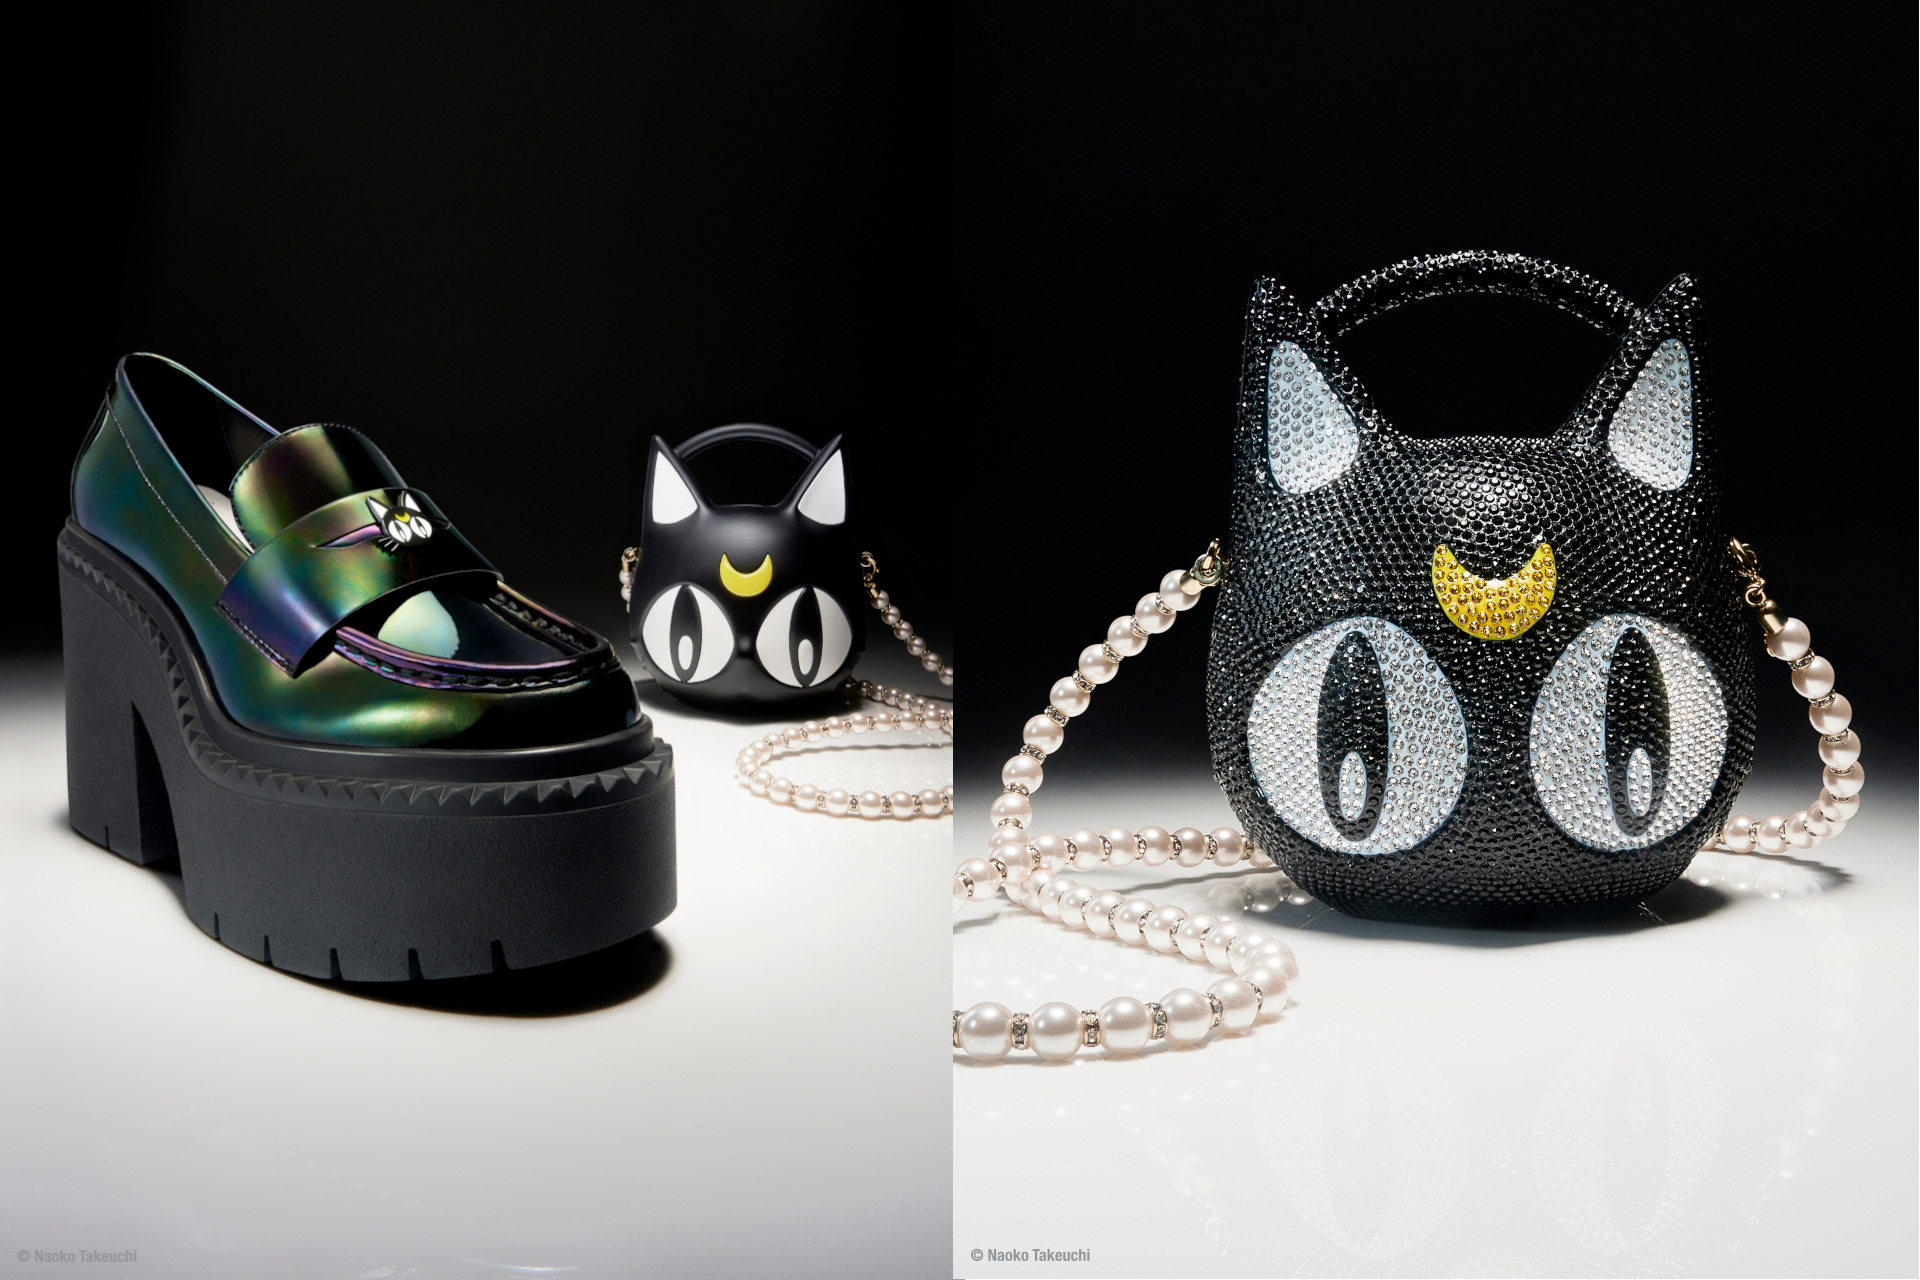 Jimmy Choo unveils Pretty Guardian Sailor Moon collection